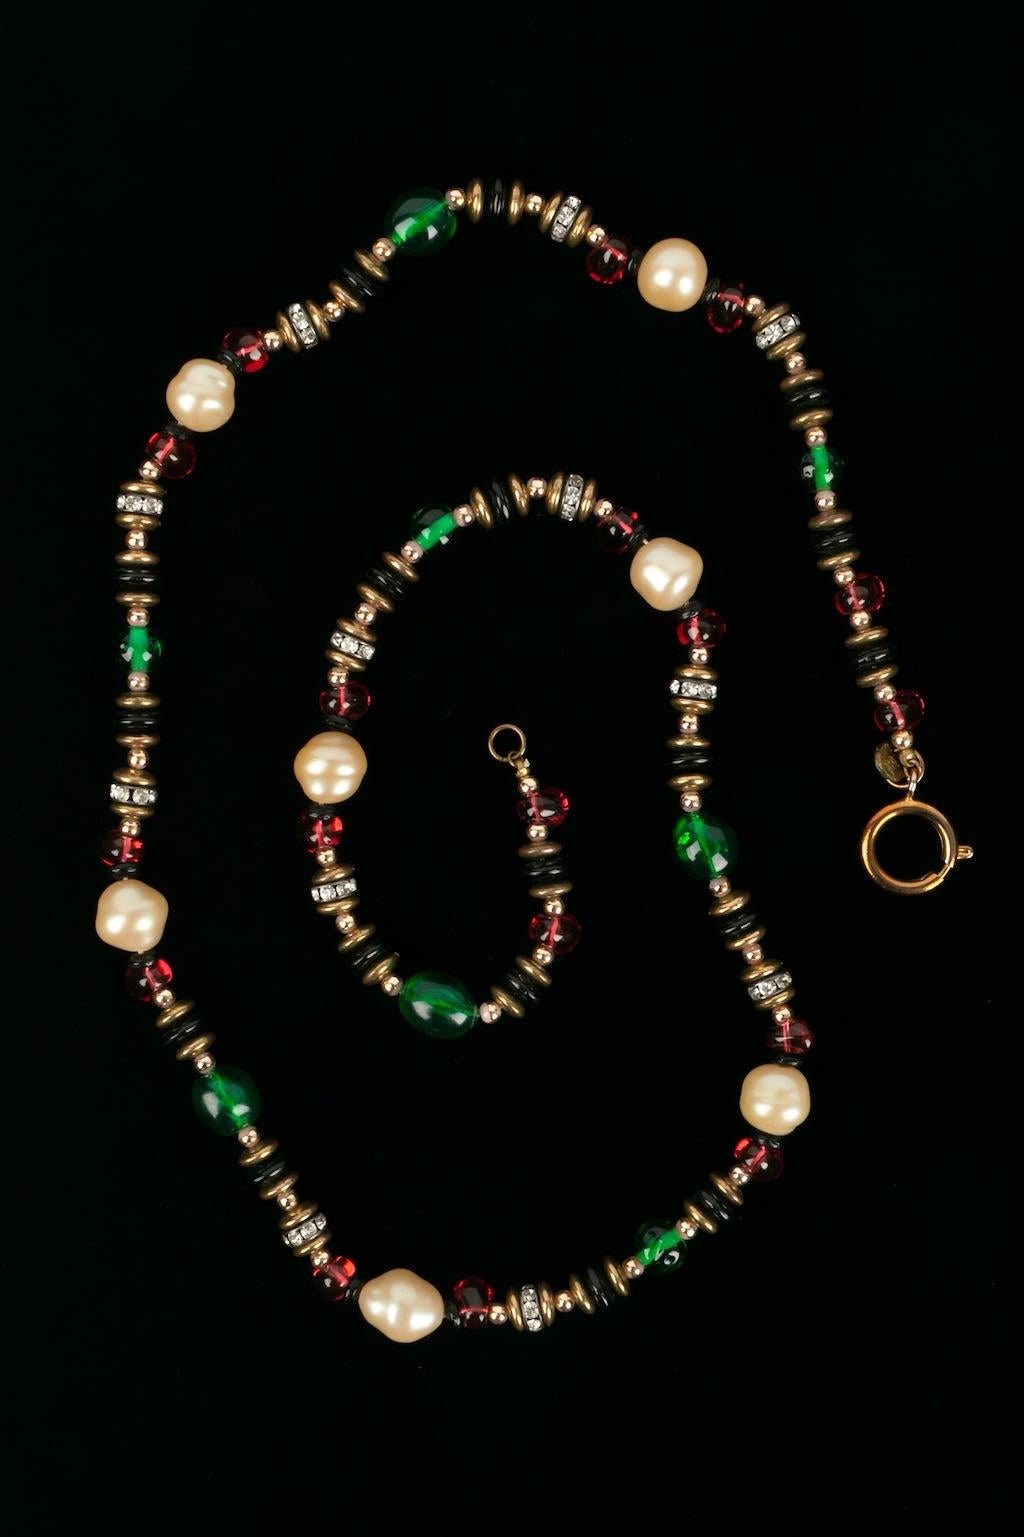 Women's Chanel Necklace in Pearls, Rhinestones and Golden Metal Rings